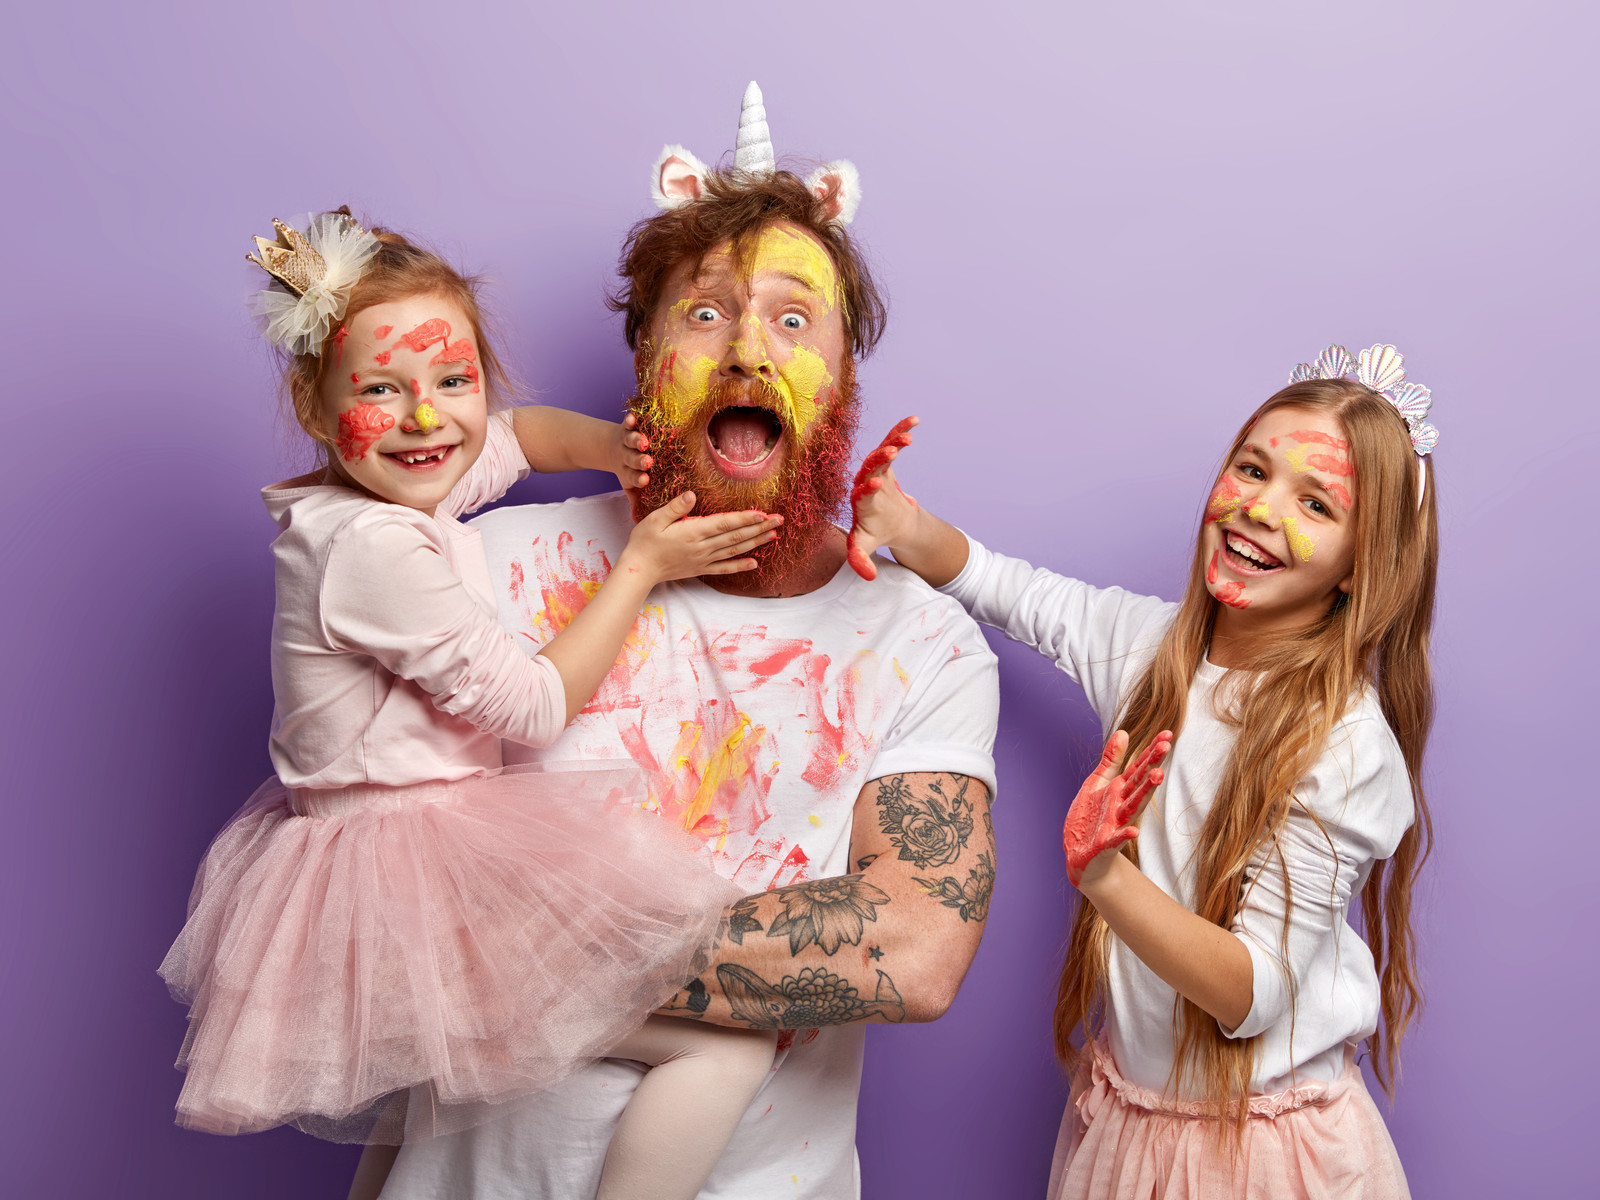 Emotional bearded busy father spends time with two naughty daughters who leave palm prints on his beard and clothes, learn how to paint, dressed in festive clothes, stand indoor. So colourful!